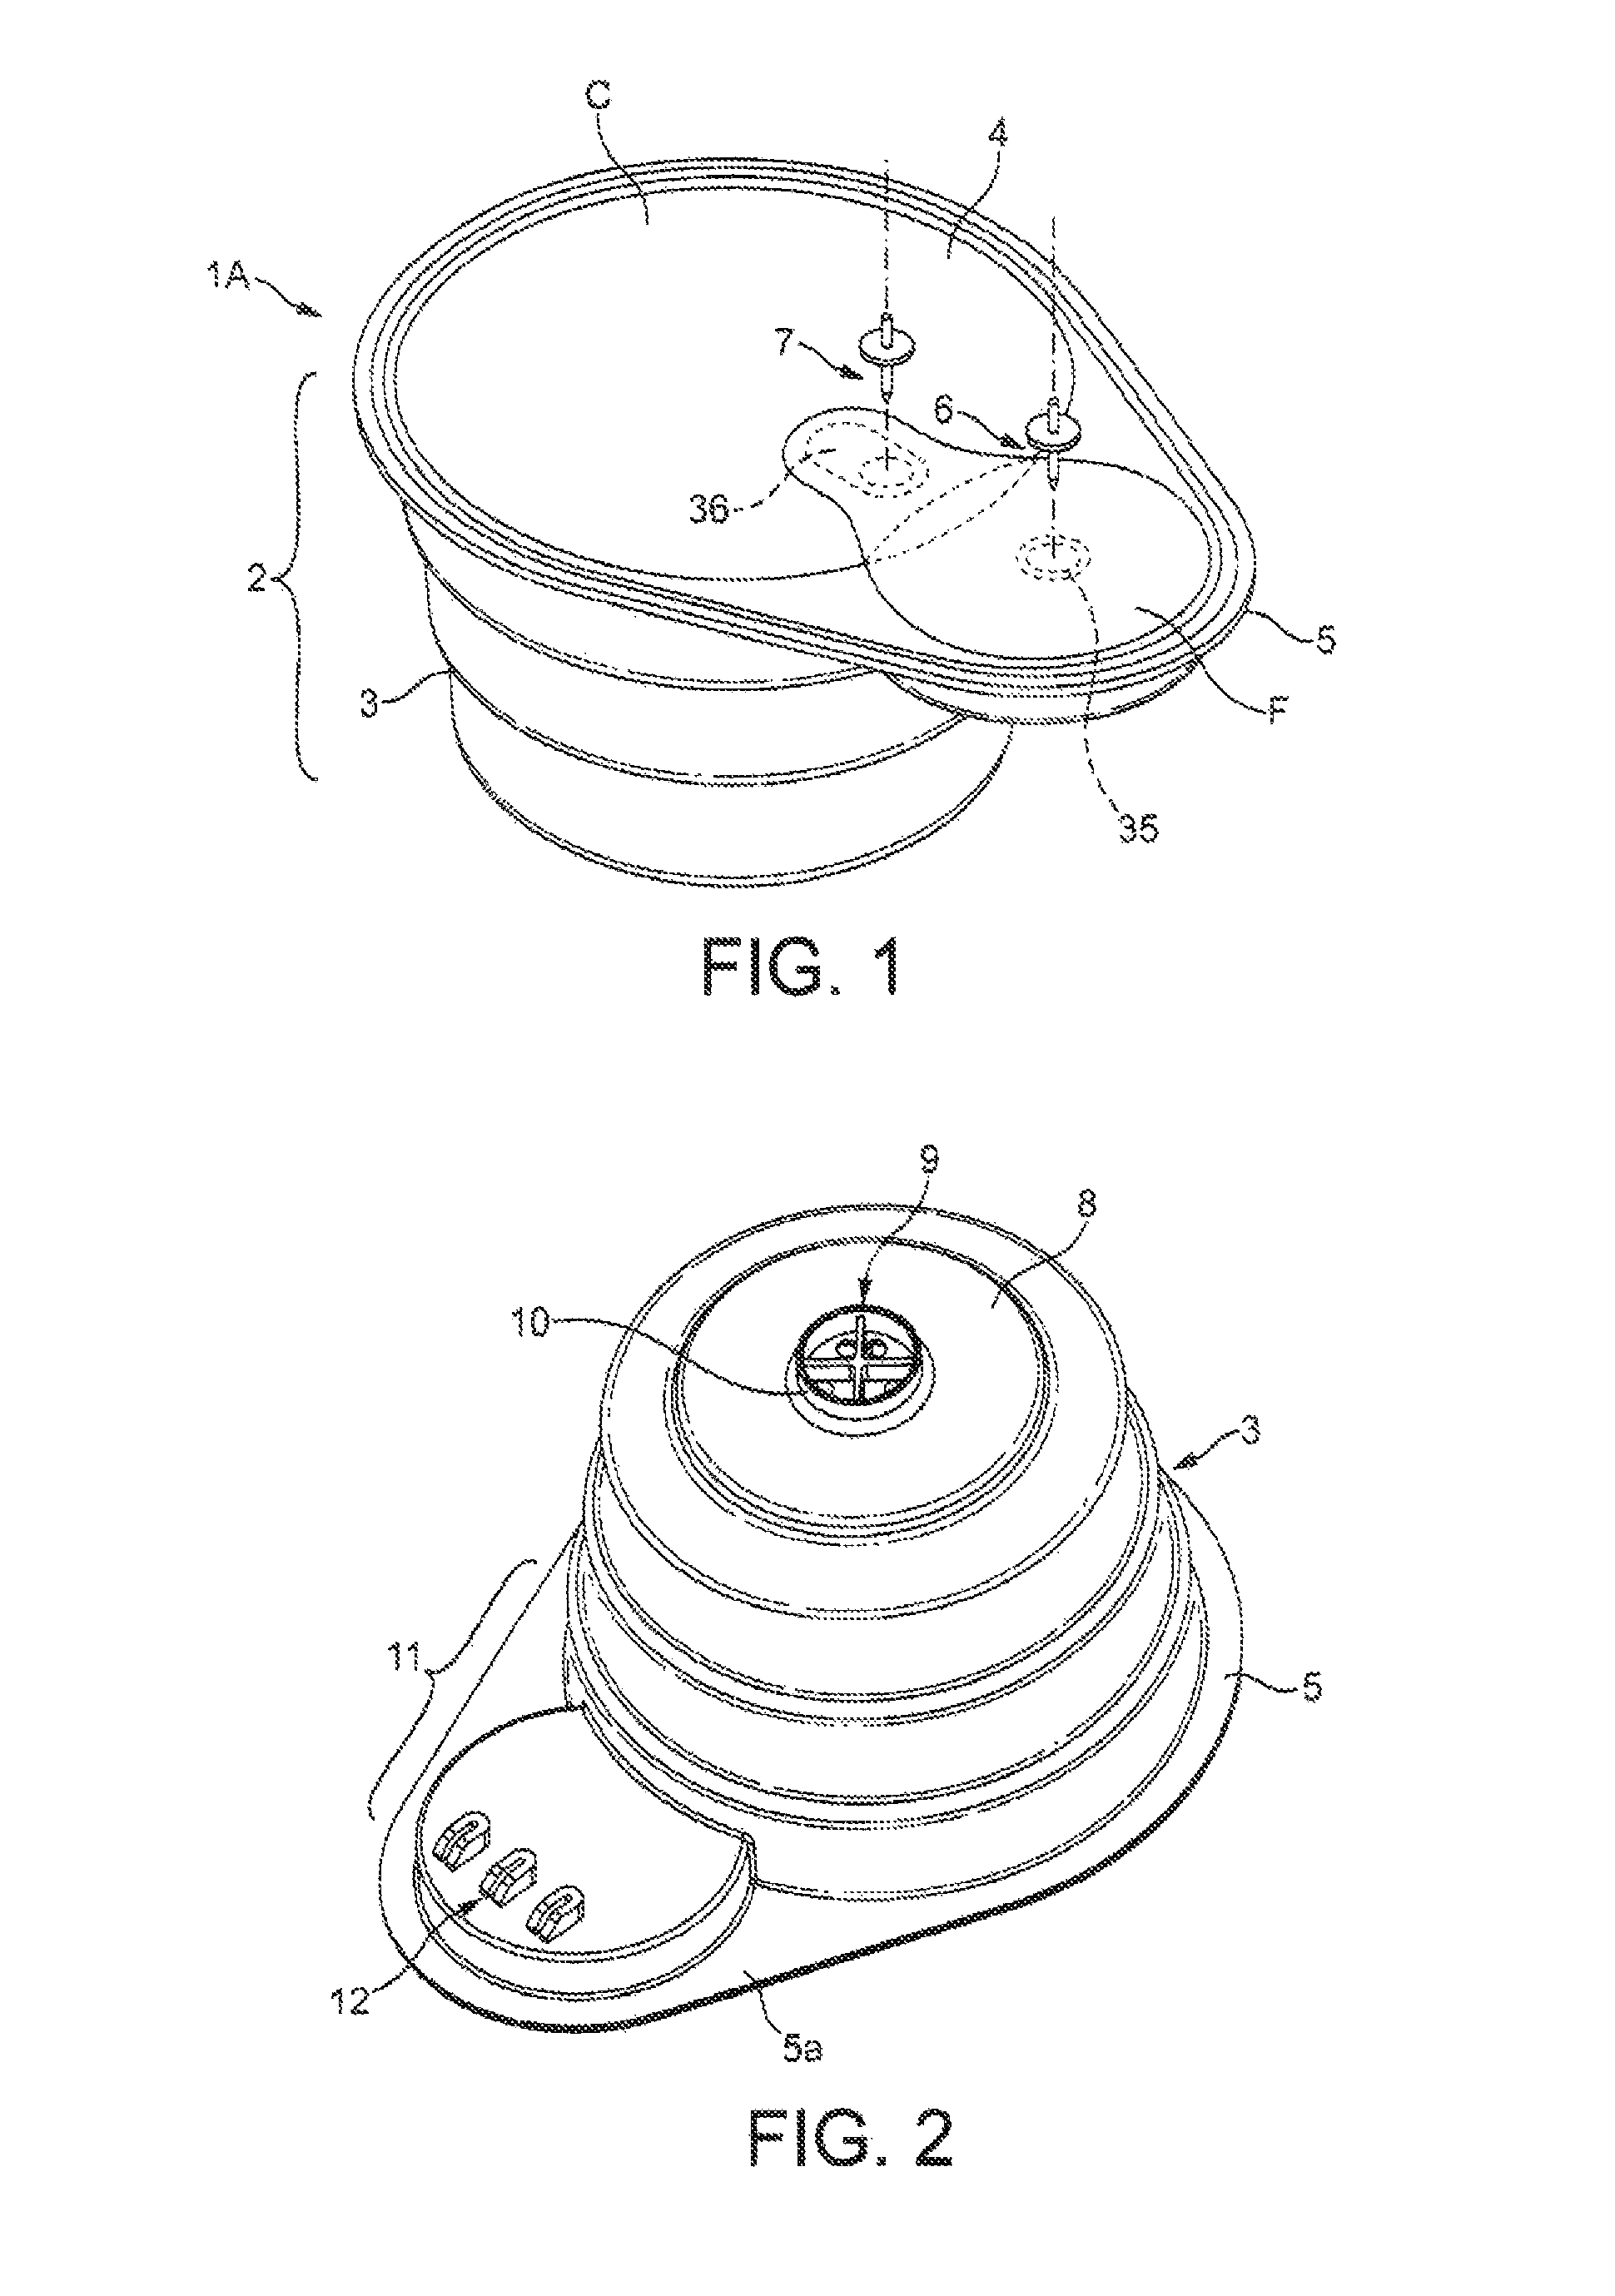 Capsule for preparing a nutritional product including a filter